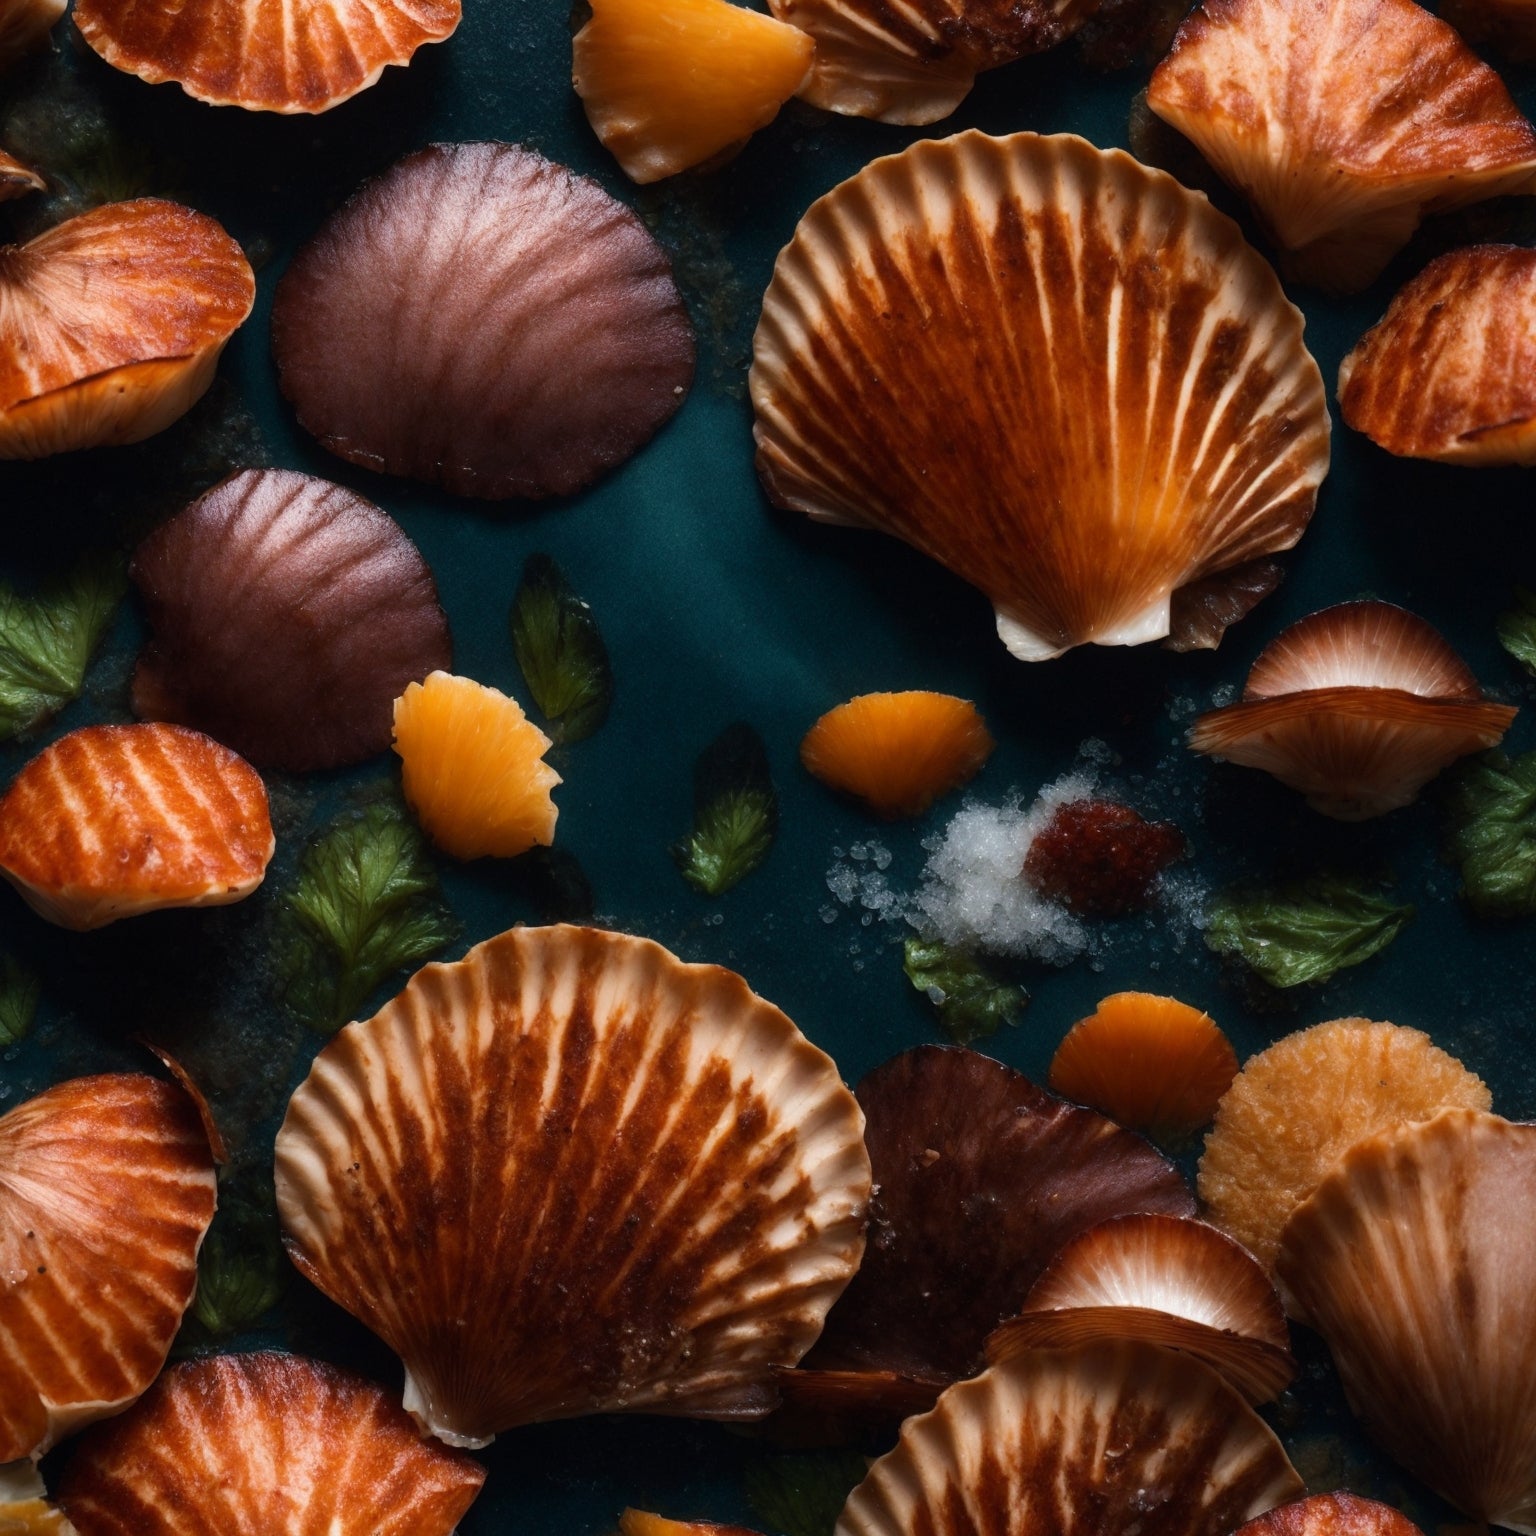 From Sea to Plate: Dive into Globalseafoods.com's Scallops